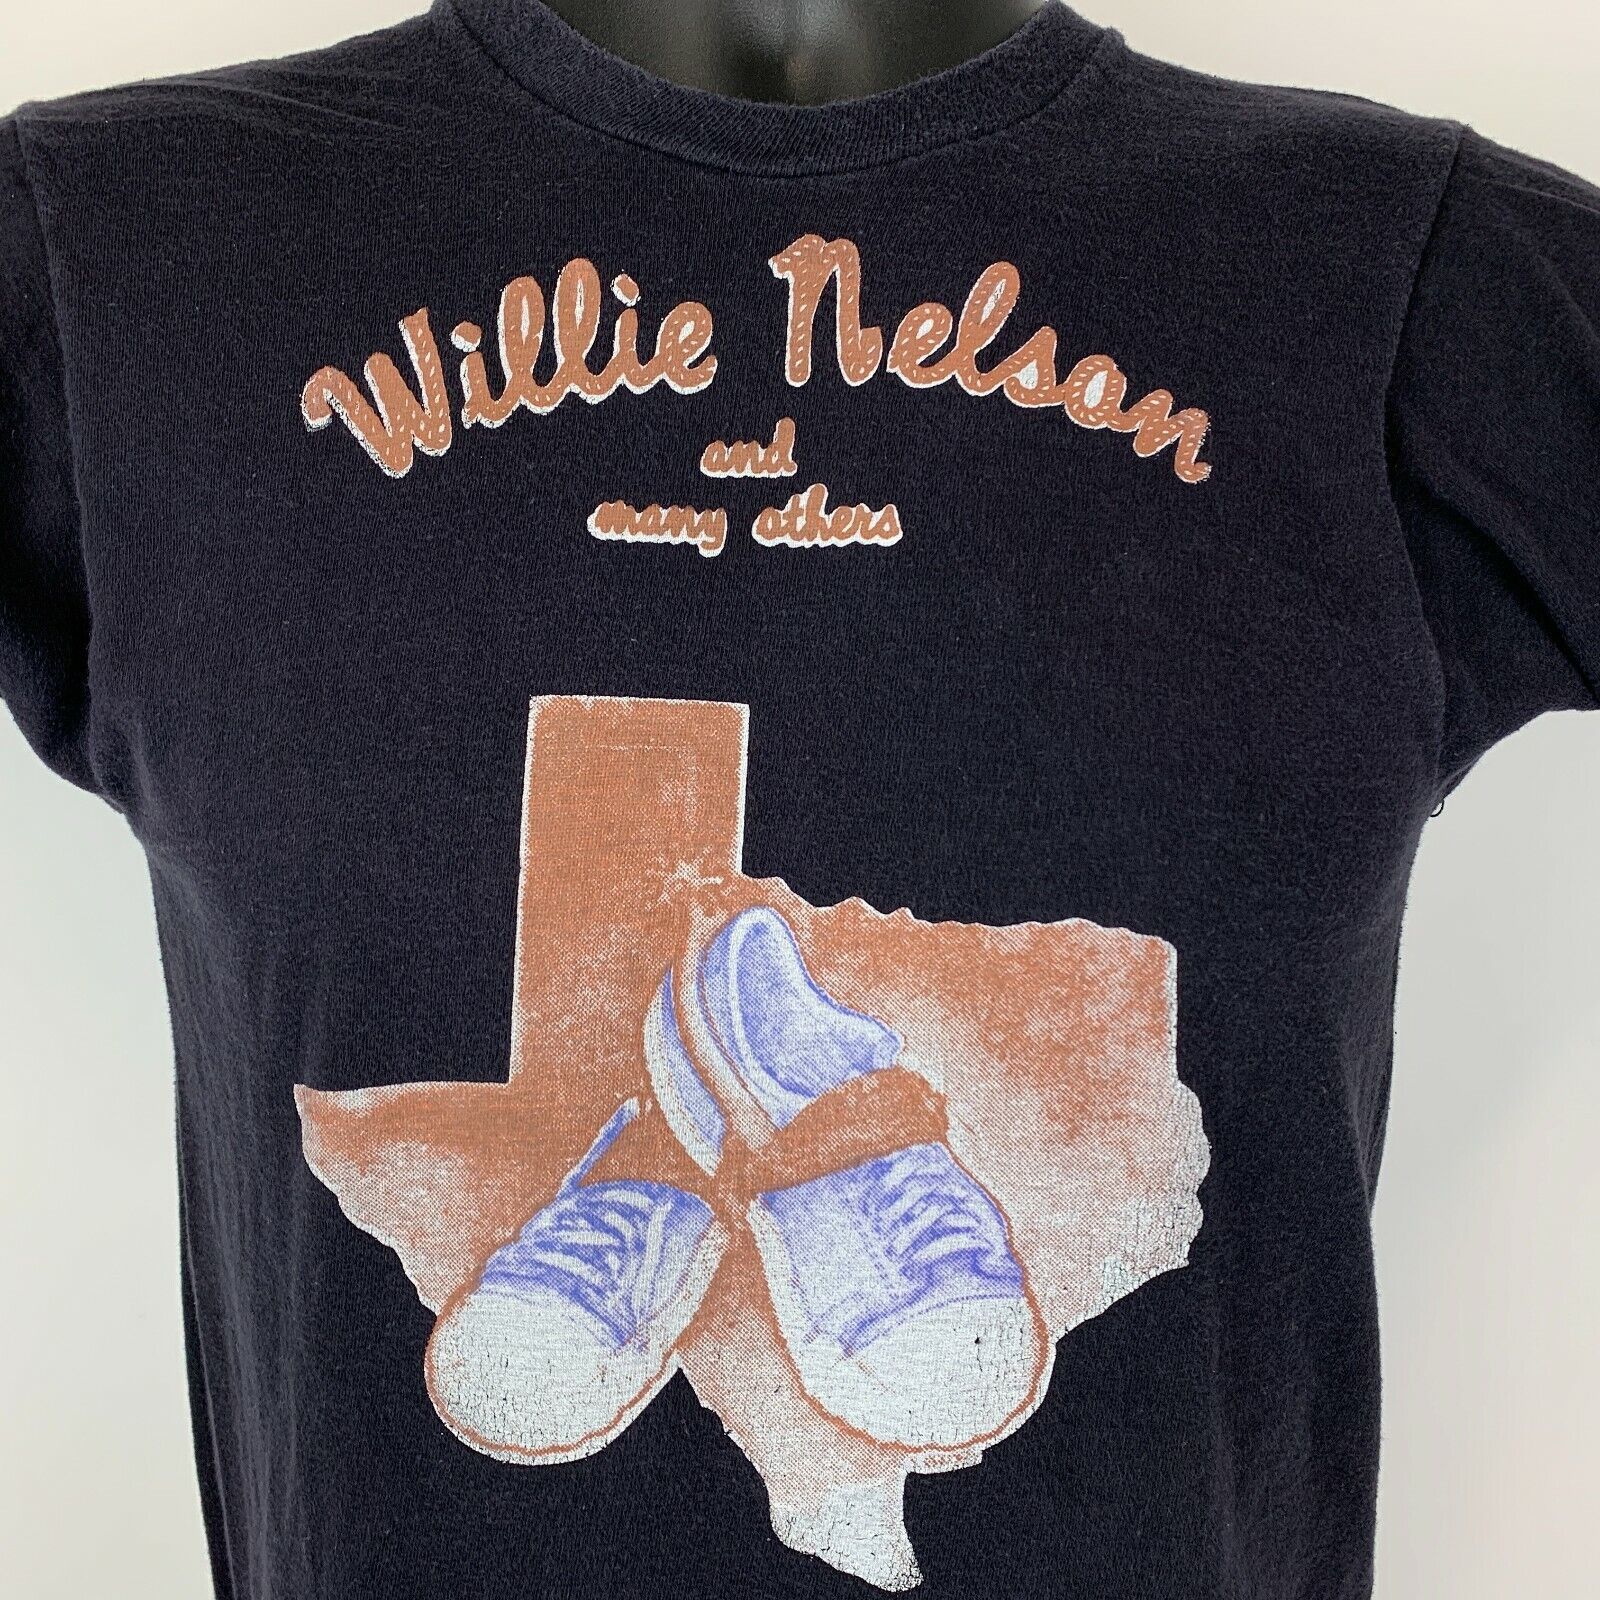 Vintage Willie Nelson Lone Star Beer Vintage 70s T Shirt Small 1974 Size US S / EU 44-46 / 1 - 5 Thumbnail